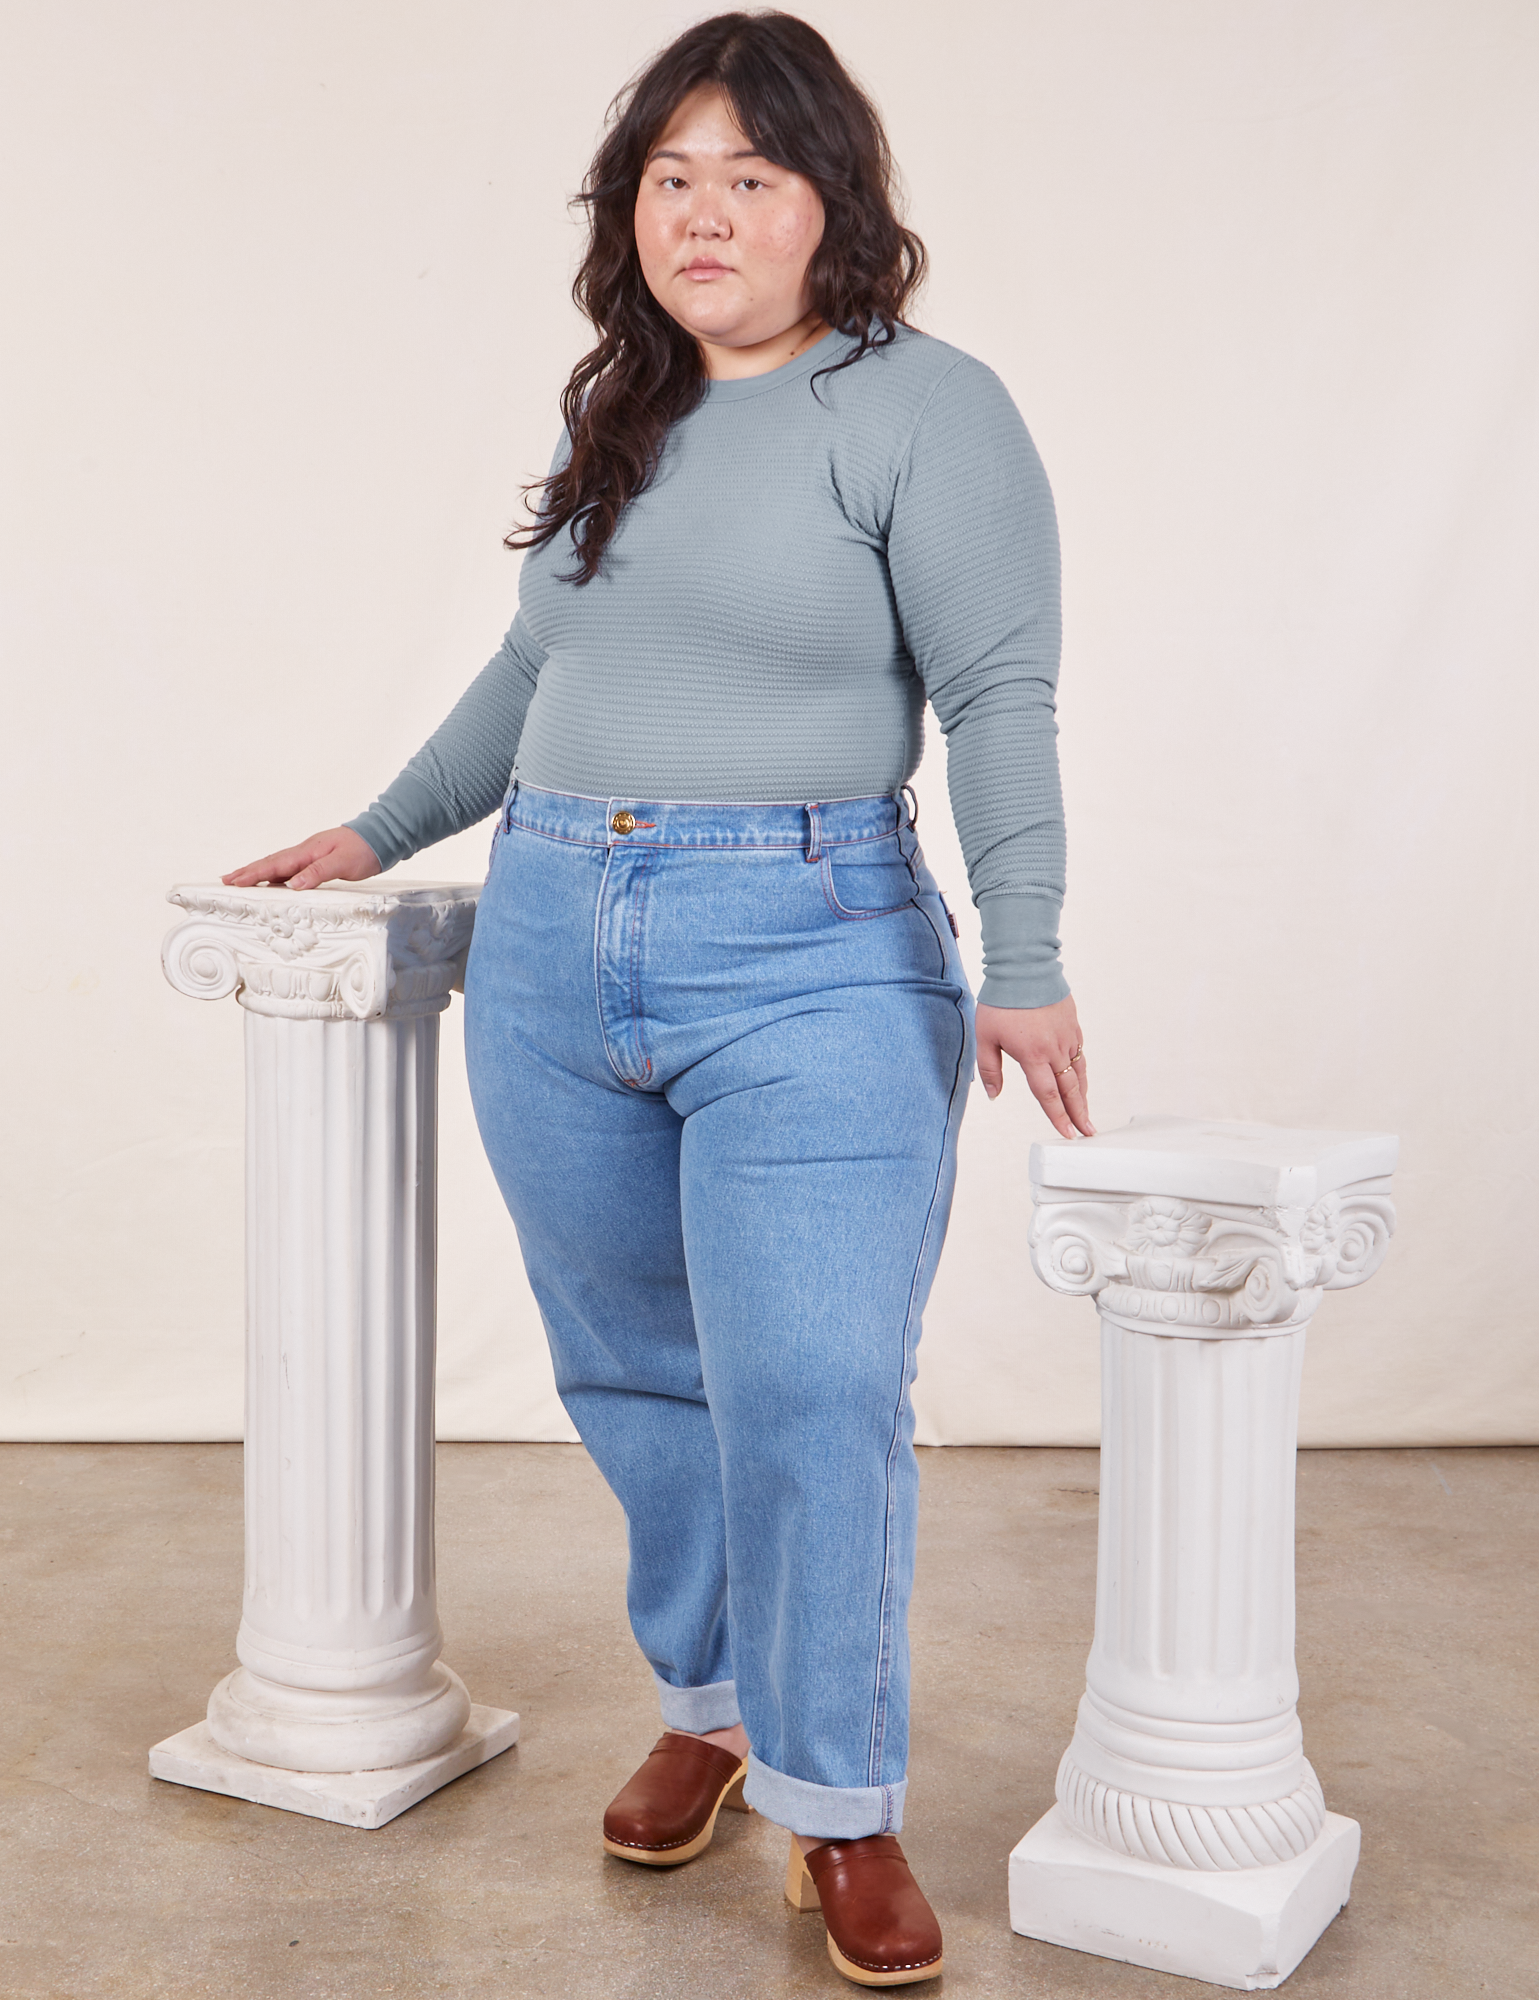 Ashley is wearing Honeycomb Thermal in Periwinkle and light wash Frontier Jeans